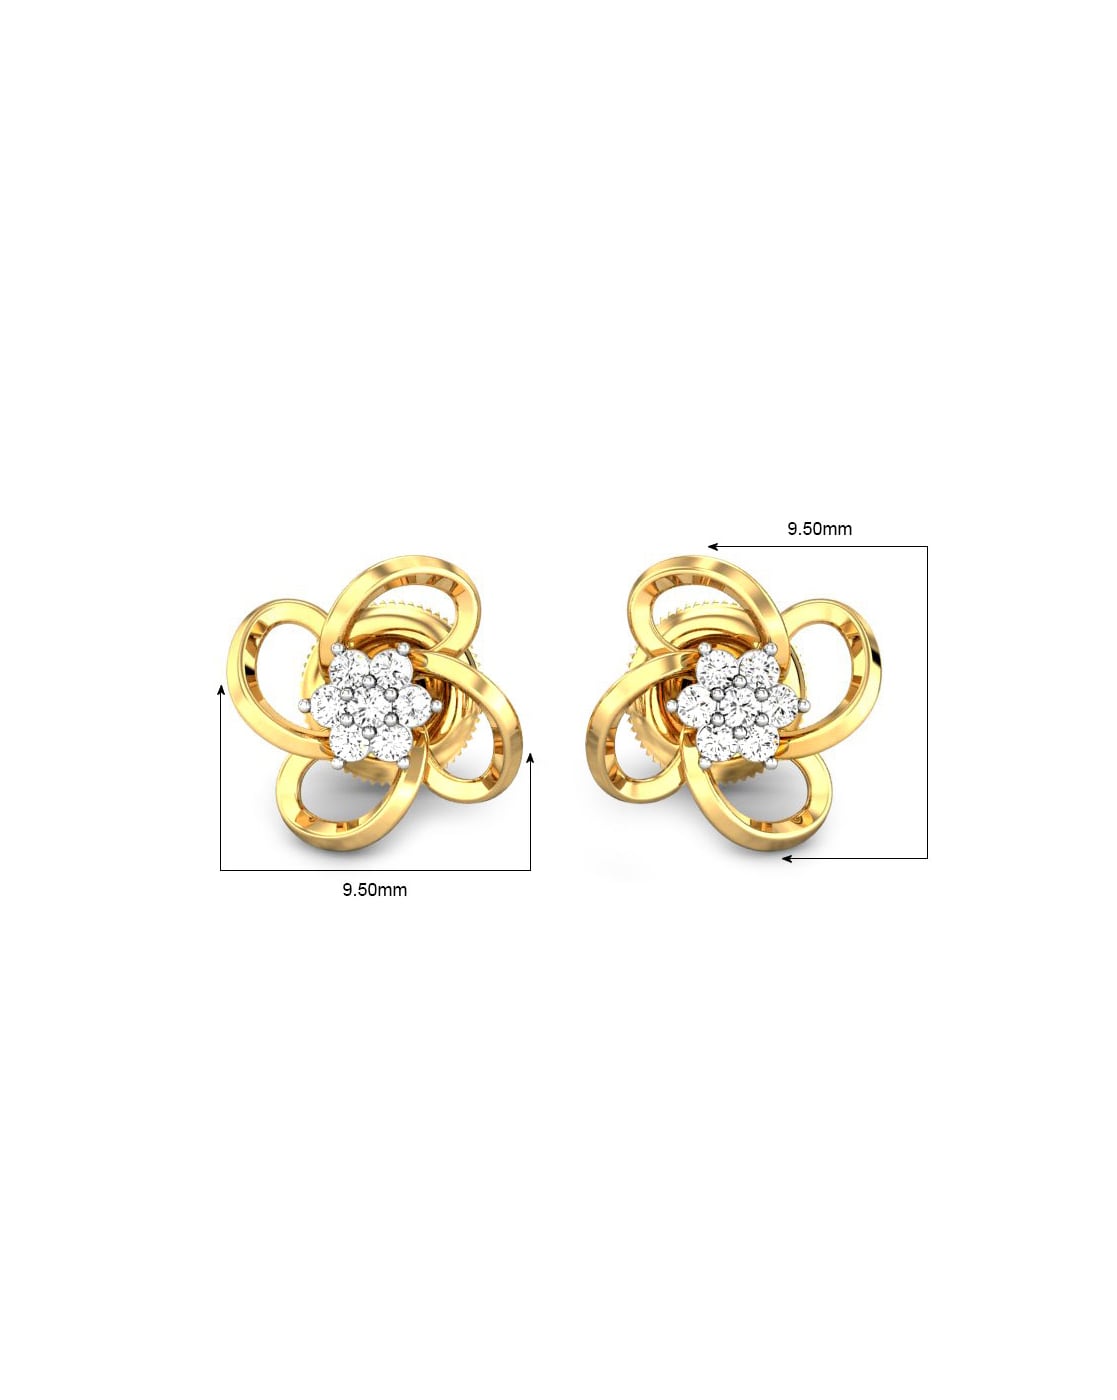 Raneecoco 18K Gold Stud Earrings Are Up to 49 Off on Amazon